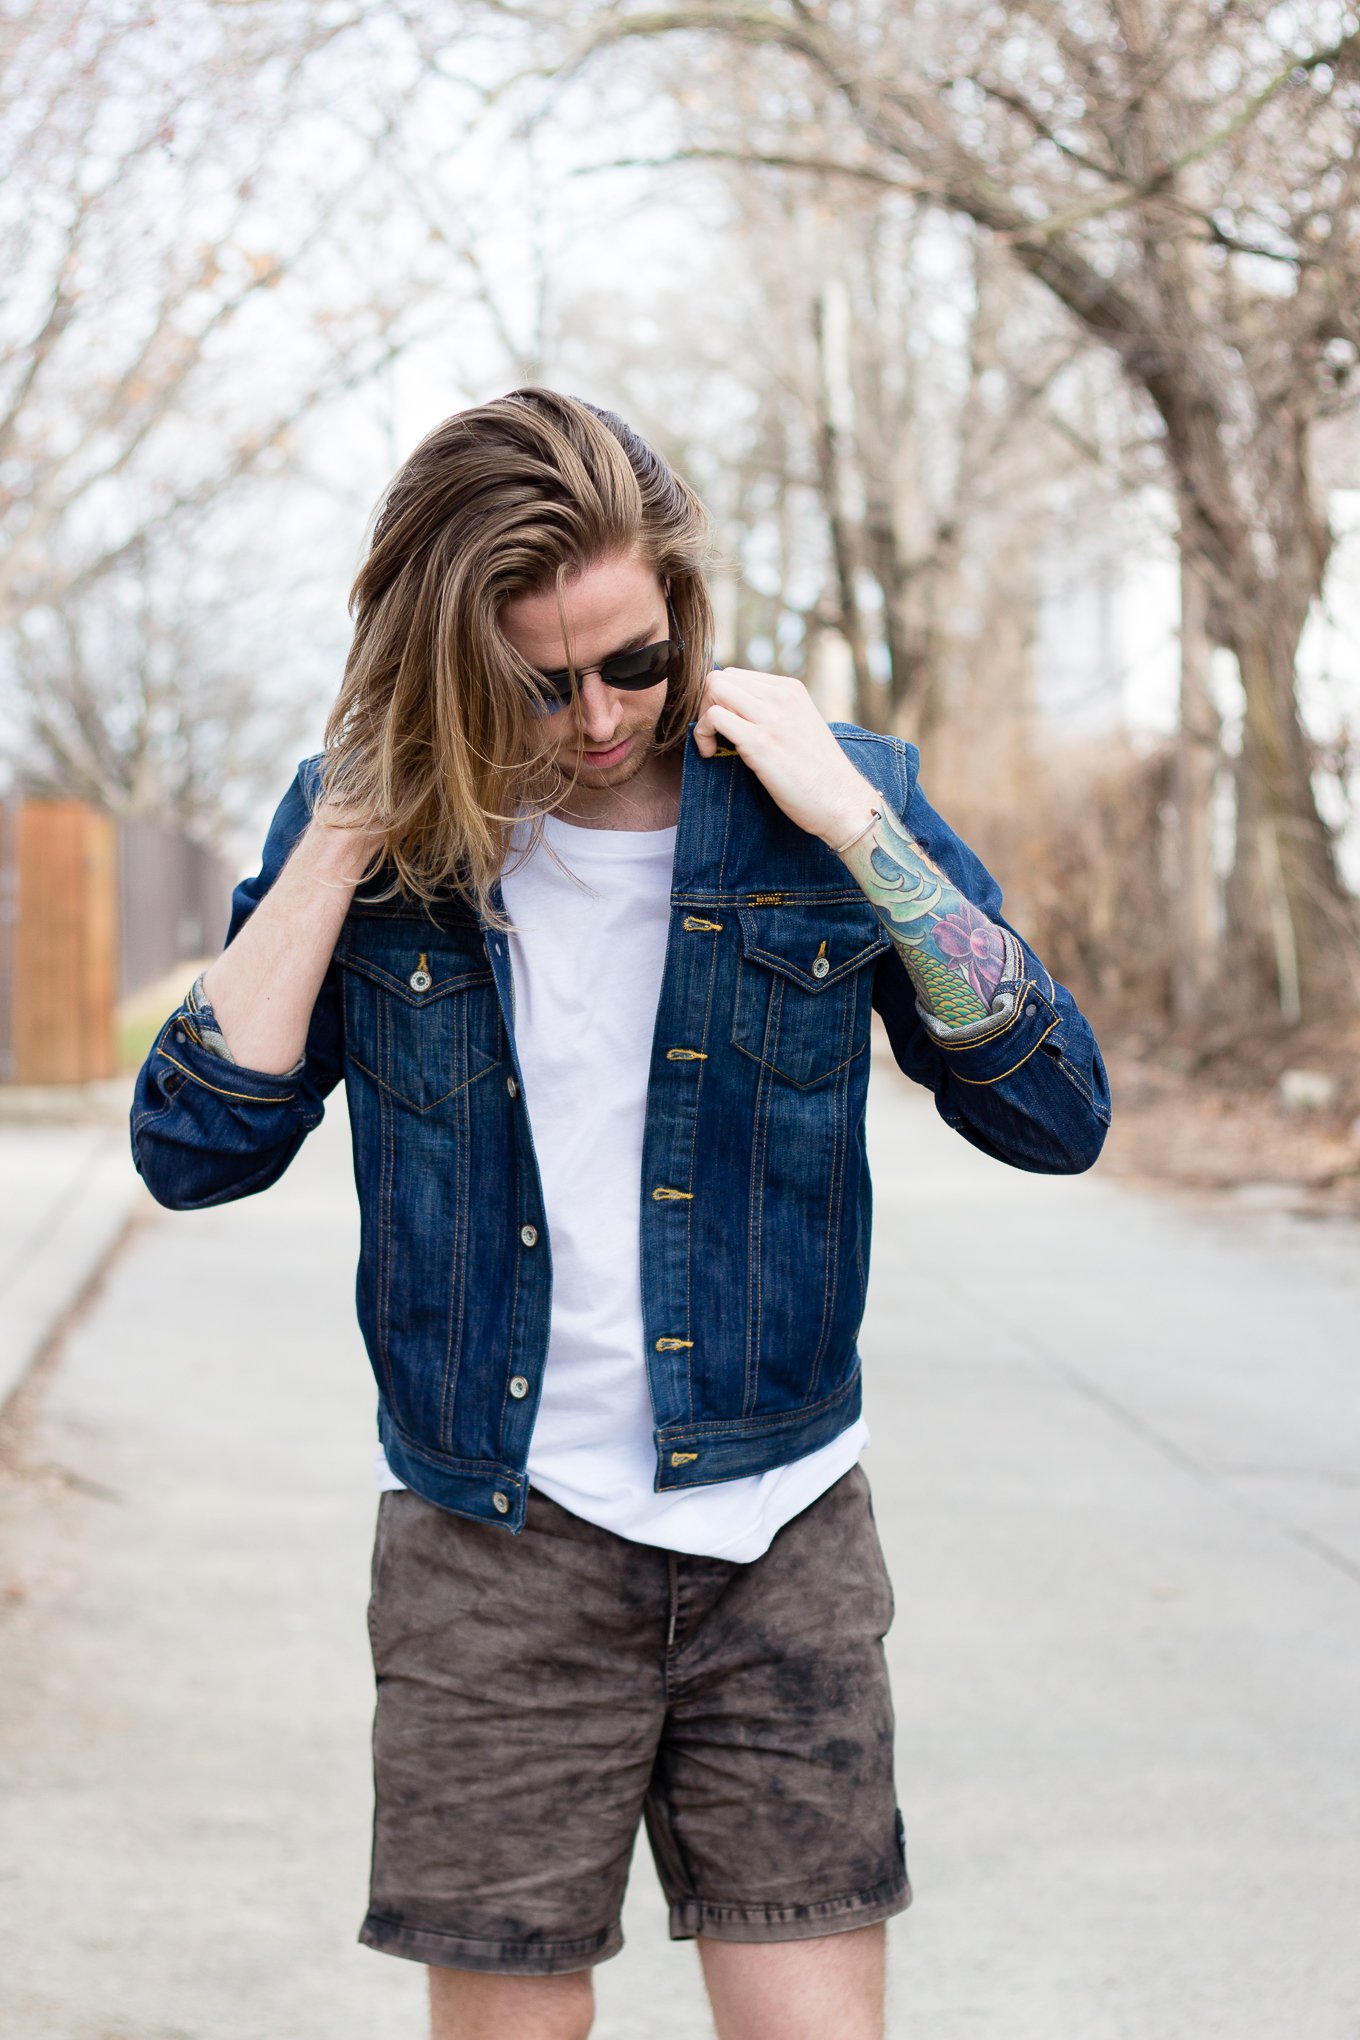 Big Star Denim Jacket and RVCA Shorts worn by The Kentucky Gent